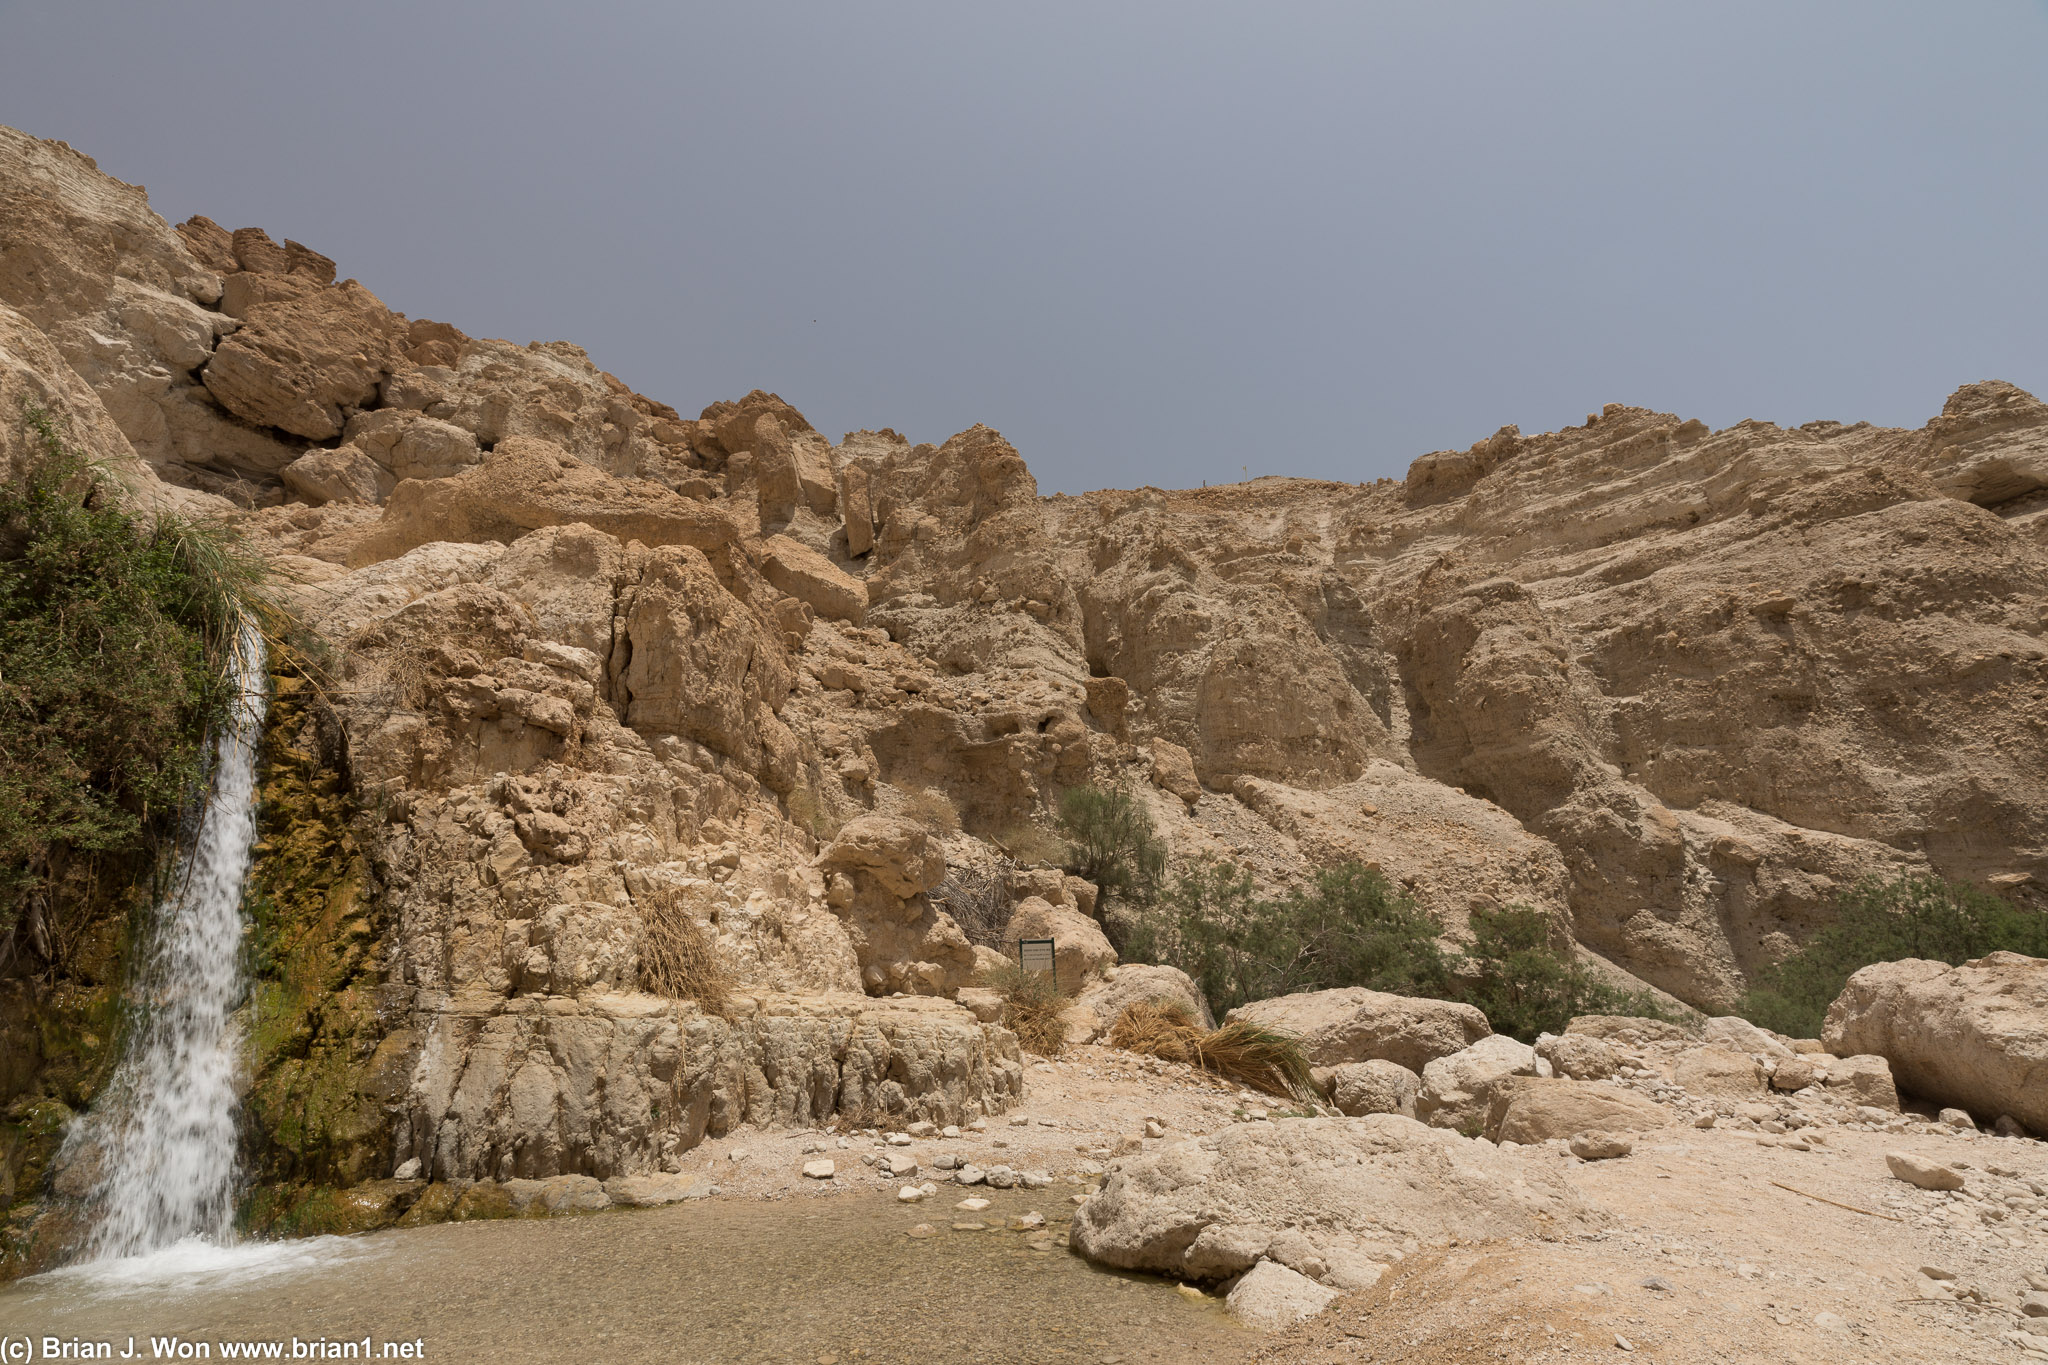 First waterfall at Ein Gedi Nature Reserve.